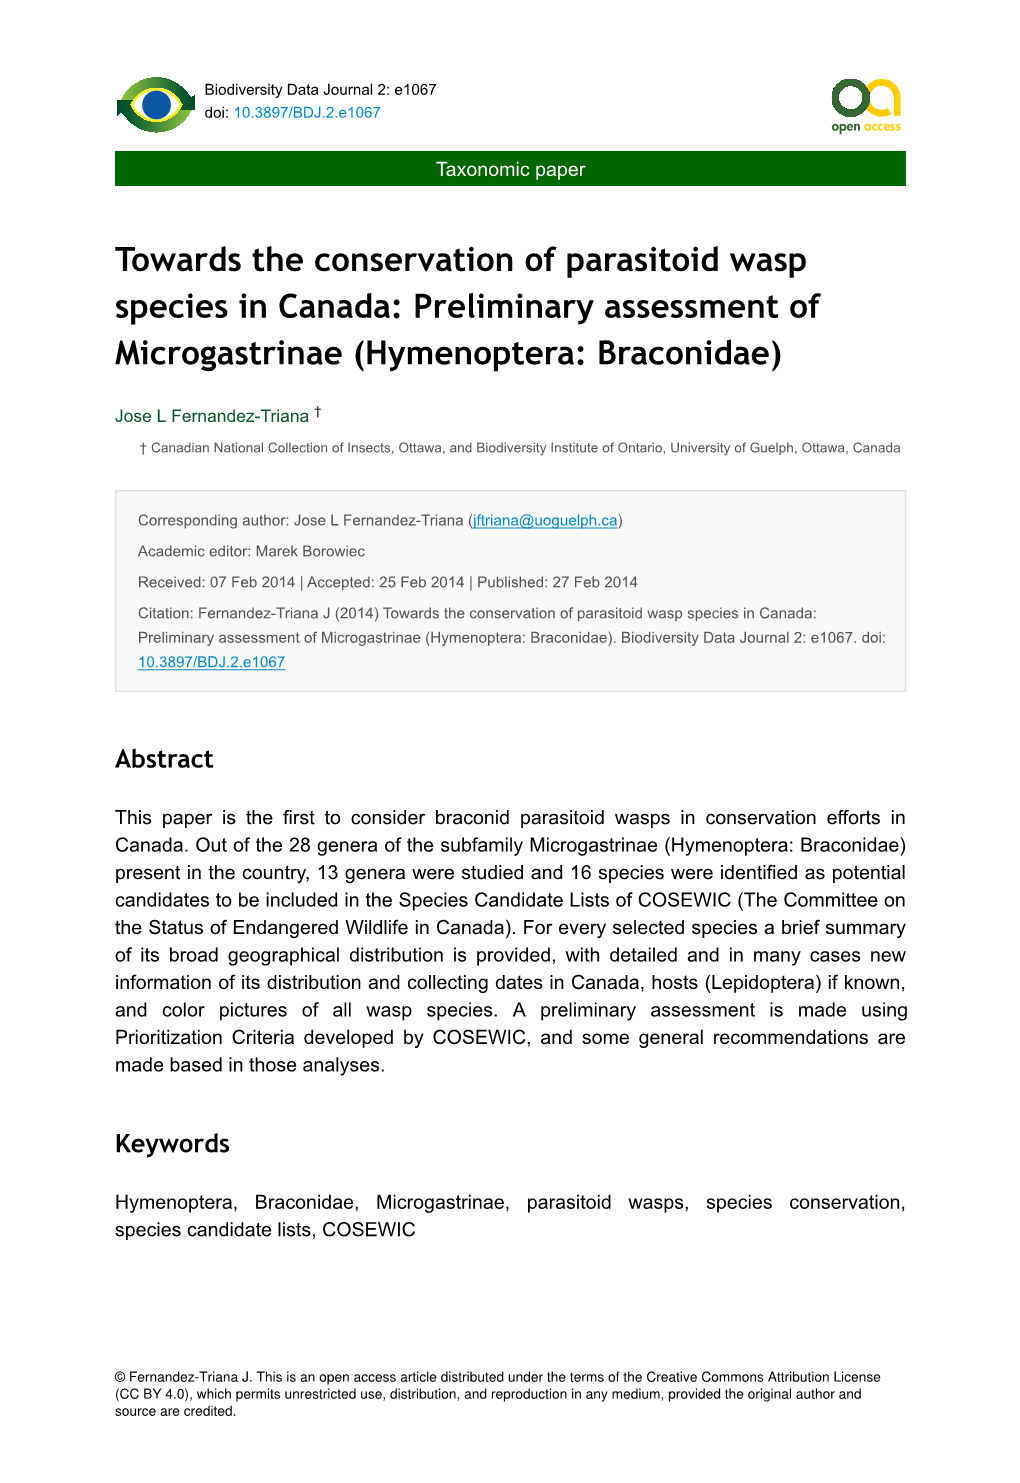 Towards the Conservation of Parasitoid Wasp Species in Canada: Preliminary Assessment of Microgastrinae (Hymenoptera: Braconidae)